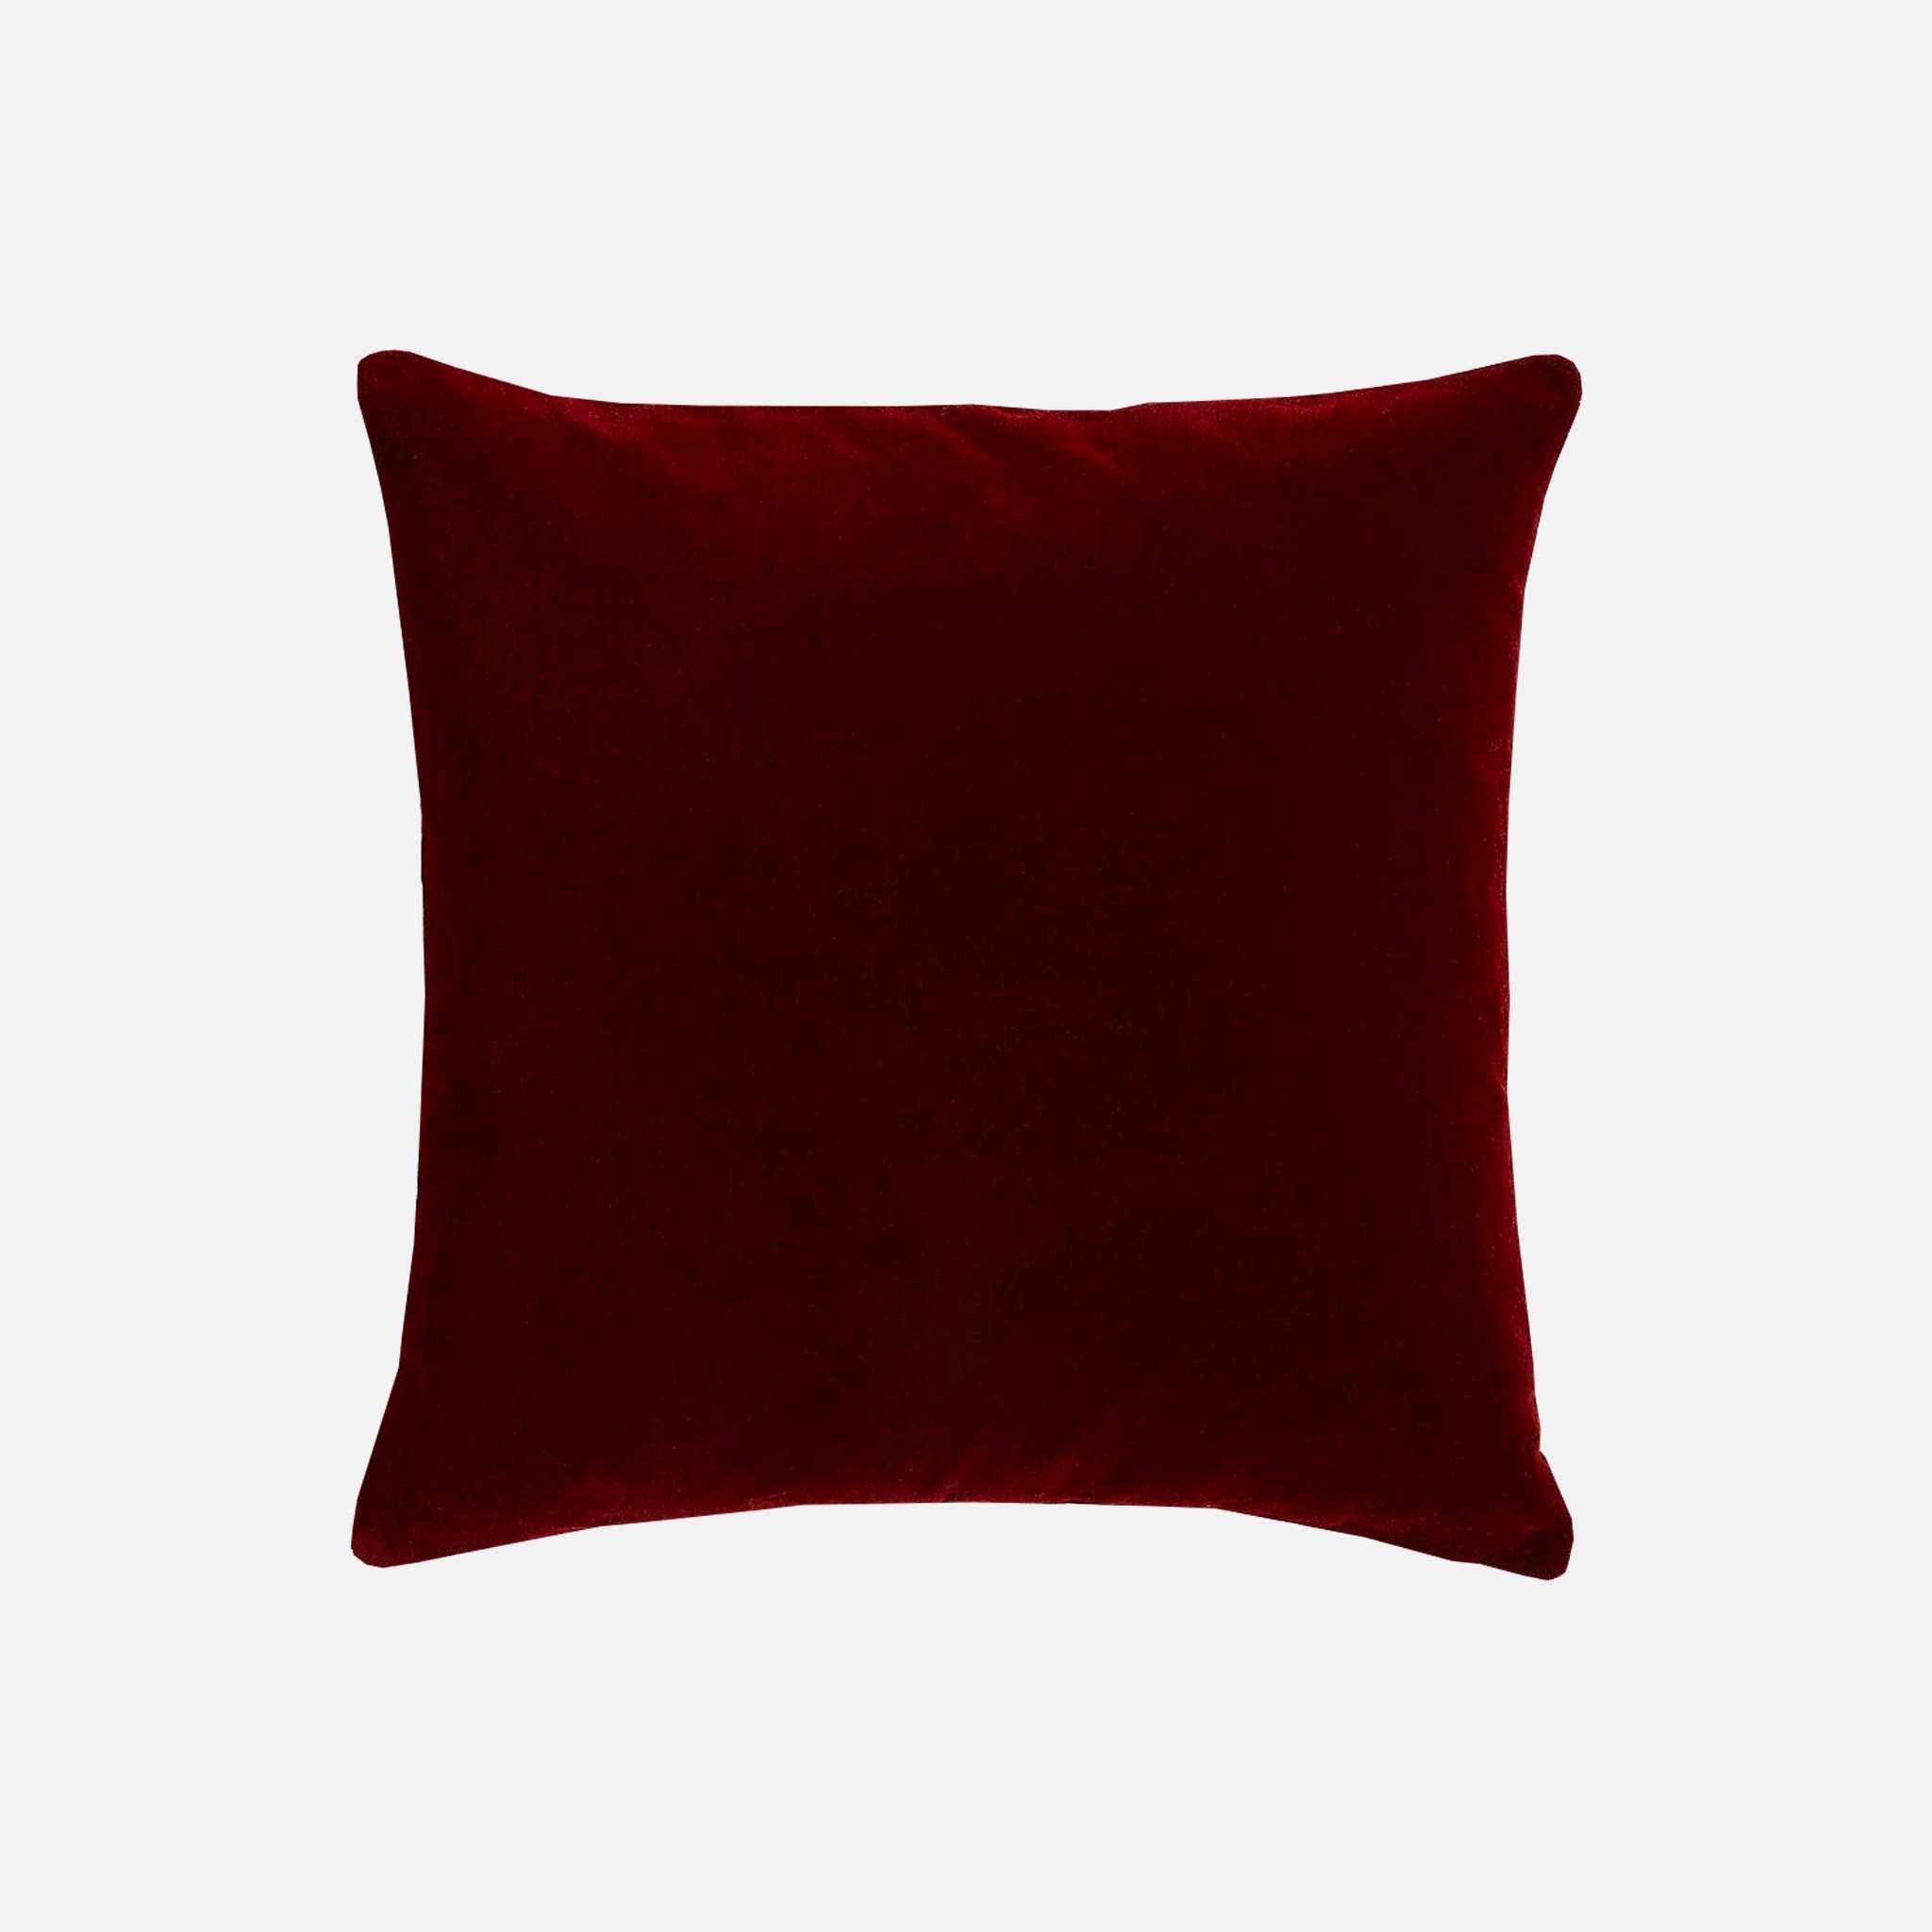 The image of an Crate and Barrel Faux Mohair Throw Pillow product